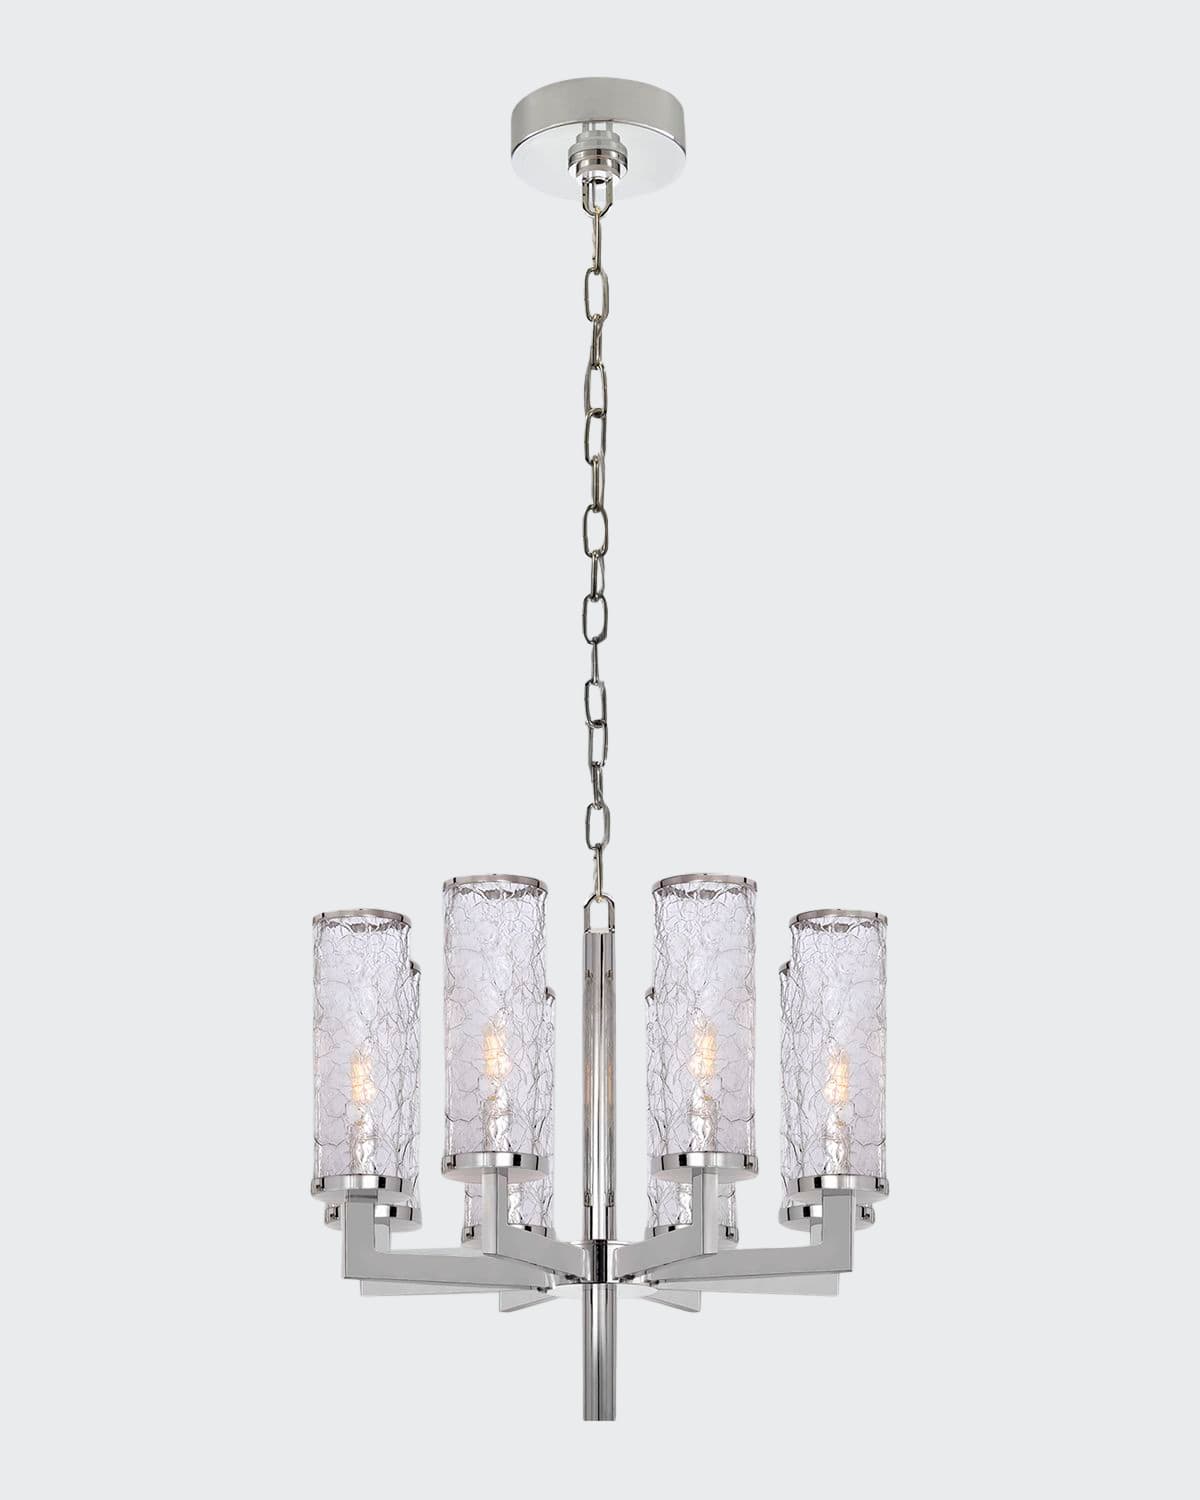 Kelly Wearstler For Visual Comfort Signature Liaison Single Tier Chandelier In Polished Nickel